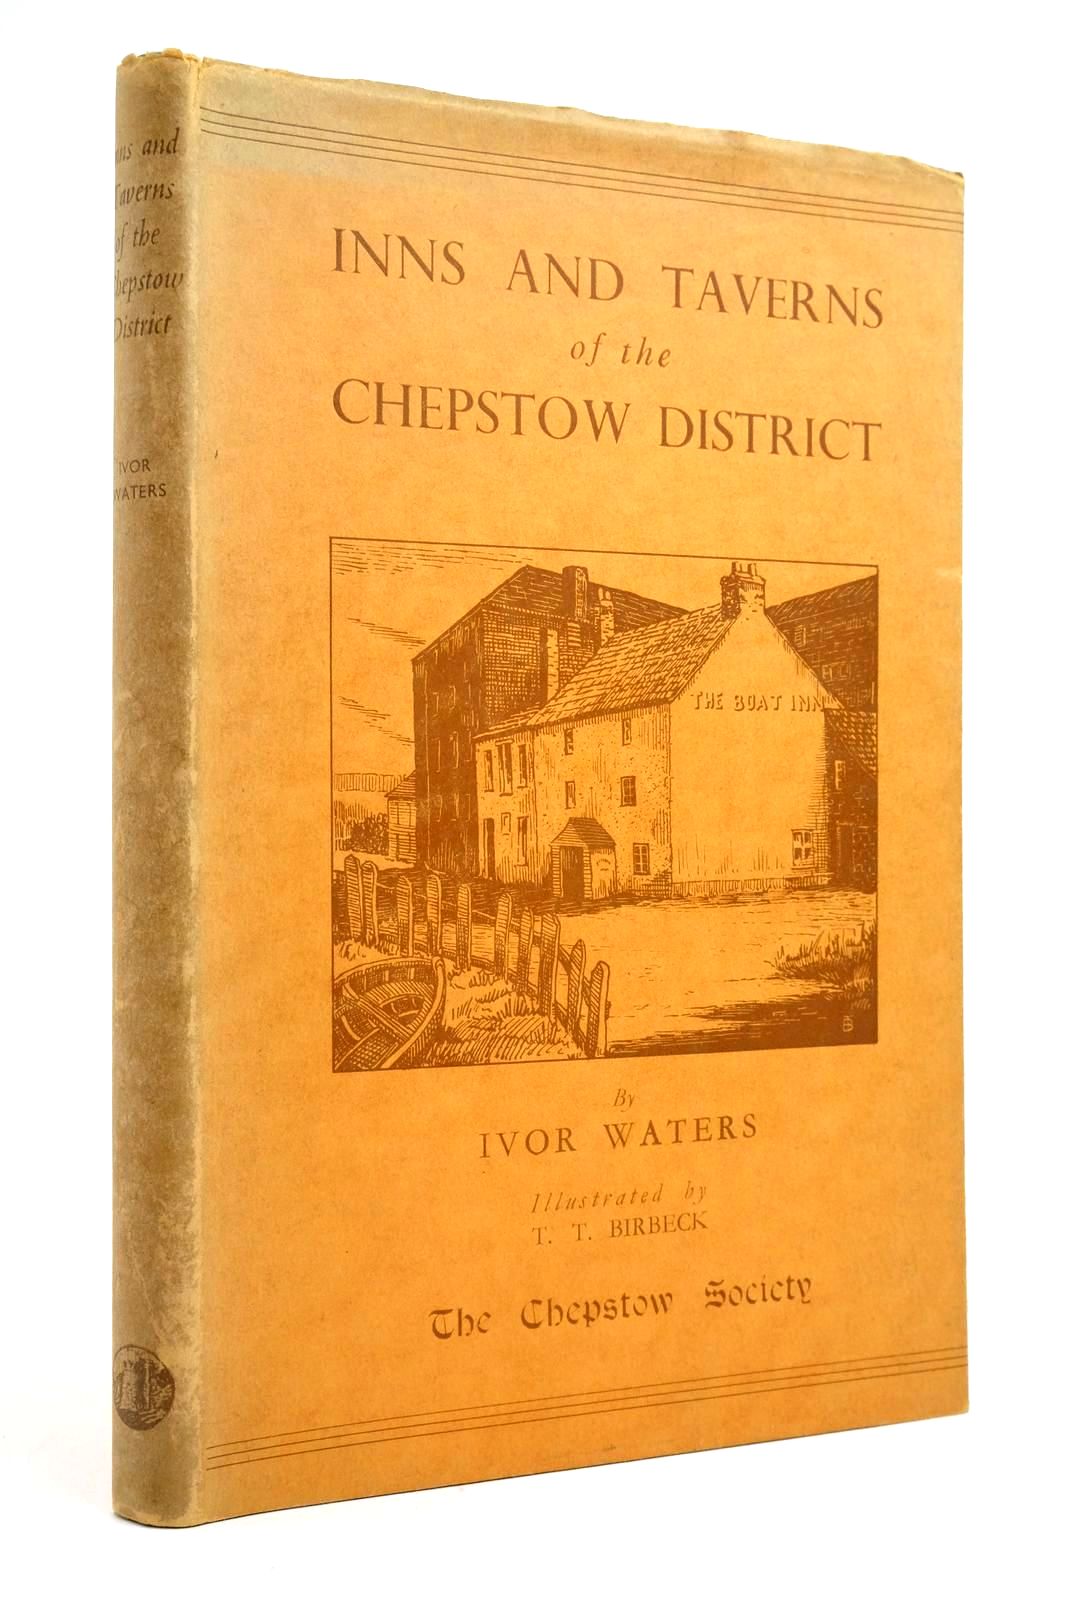 Photo of INNS AND TAVERNS OF THE CHEPSTOW DISTRICT written by Waters, Ivor illustrated by Birbeck, T.T. published by The Chepstow Society (STOCK CODE: 2135503)  for sale by Stella & Rose's Books